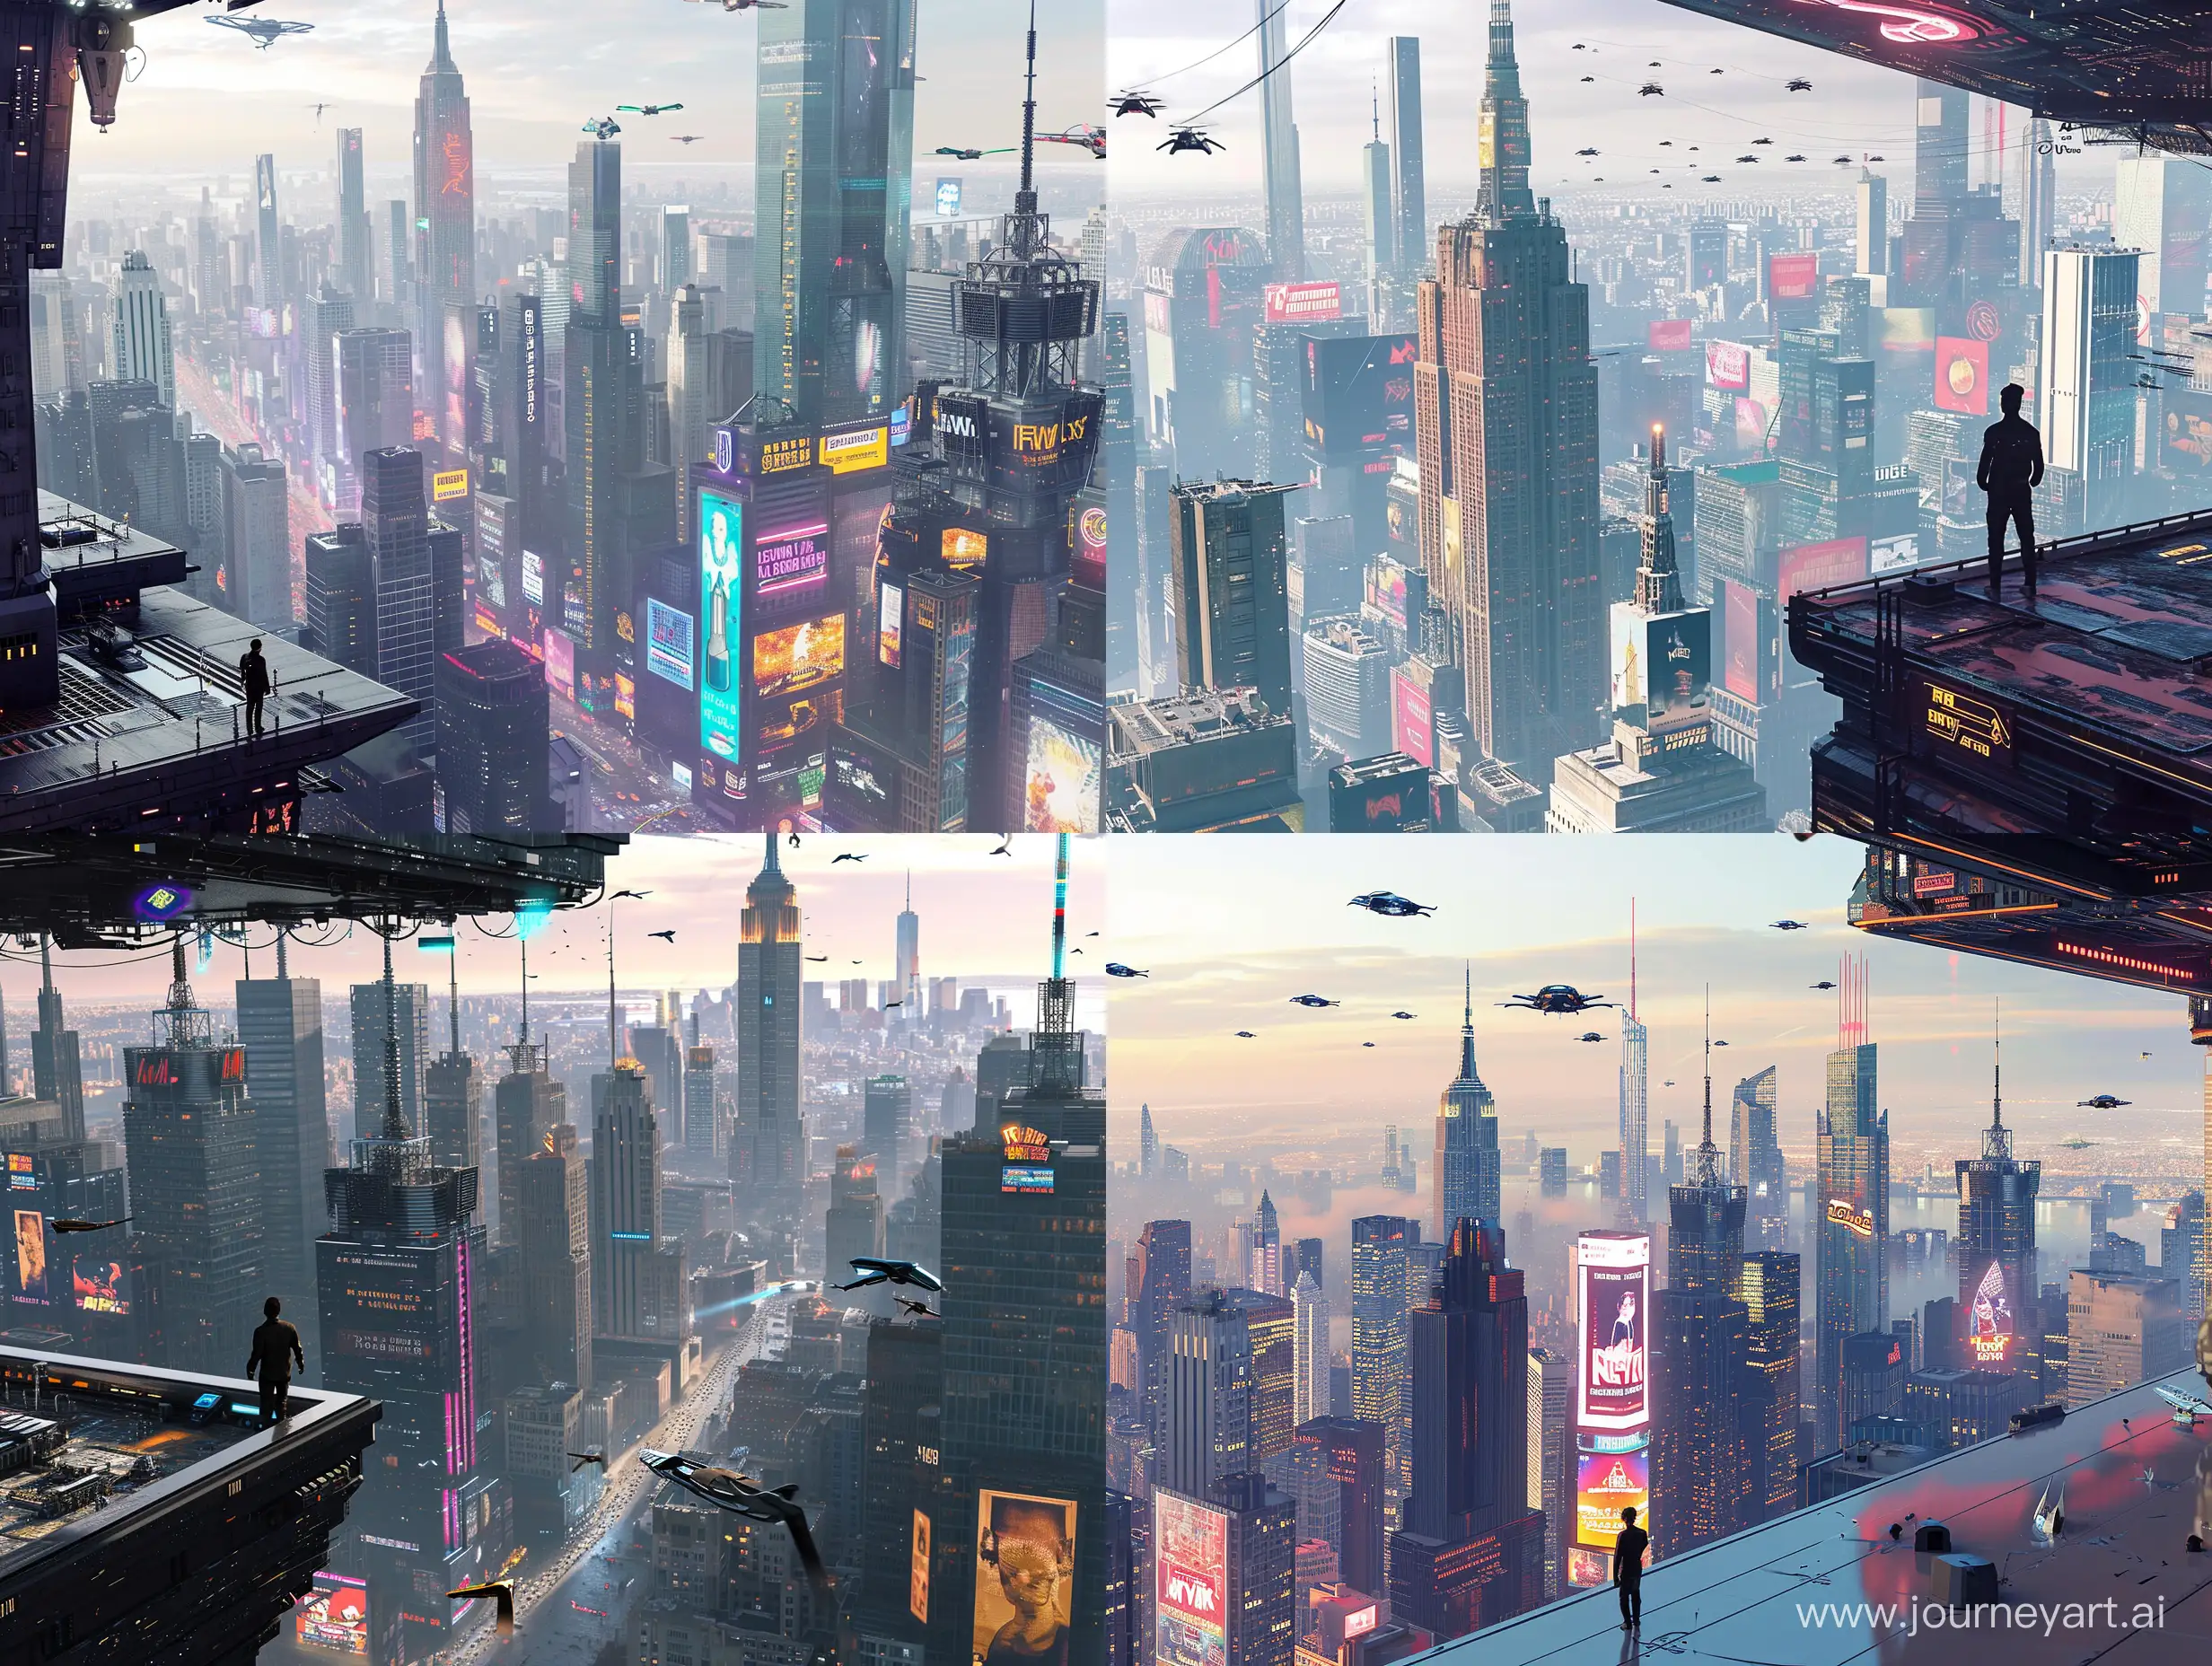 "Create a highly detailed, photorealistic render of a bustling, futuristic science fiction version of New York City during the day. The scene unfolds on the rooftop of a high-rise building with a man standing at the edge, gazing towards the Empire State Building. The cityscape is alive with advanced transportation systems, including flying vehicles weaving between skyscrapers adorned with holographic billboards and neon signs. The architecture is a blend of familiar New York landmarks and ultra-modern structures, reflecting a sophisticated urban future. The atmosphere is vibrant with the dynamic visuals of a sci-fi metropolis, complete with reflections and intricate lighting effects that capture the essence of a day in the life of a future New York."




